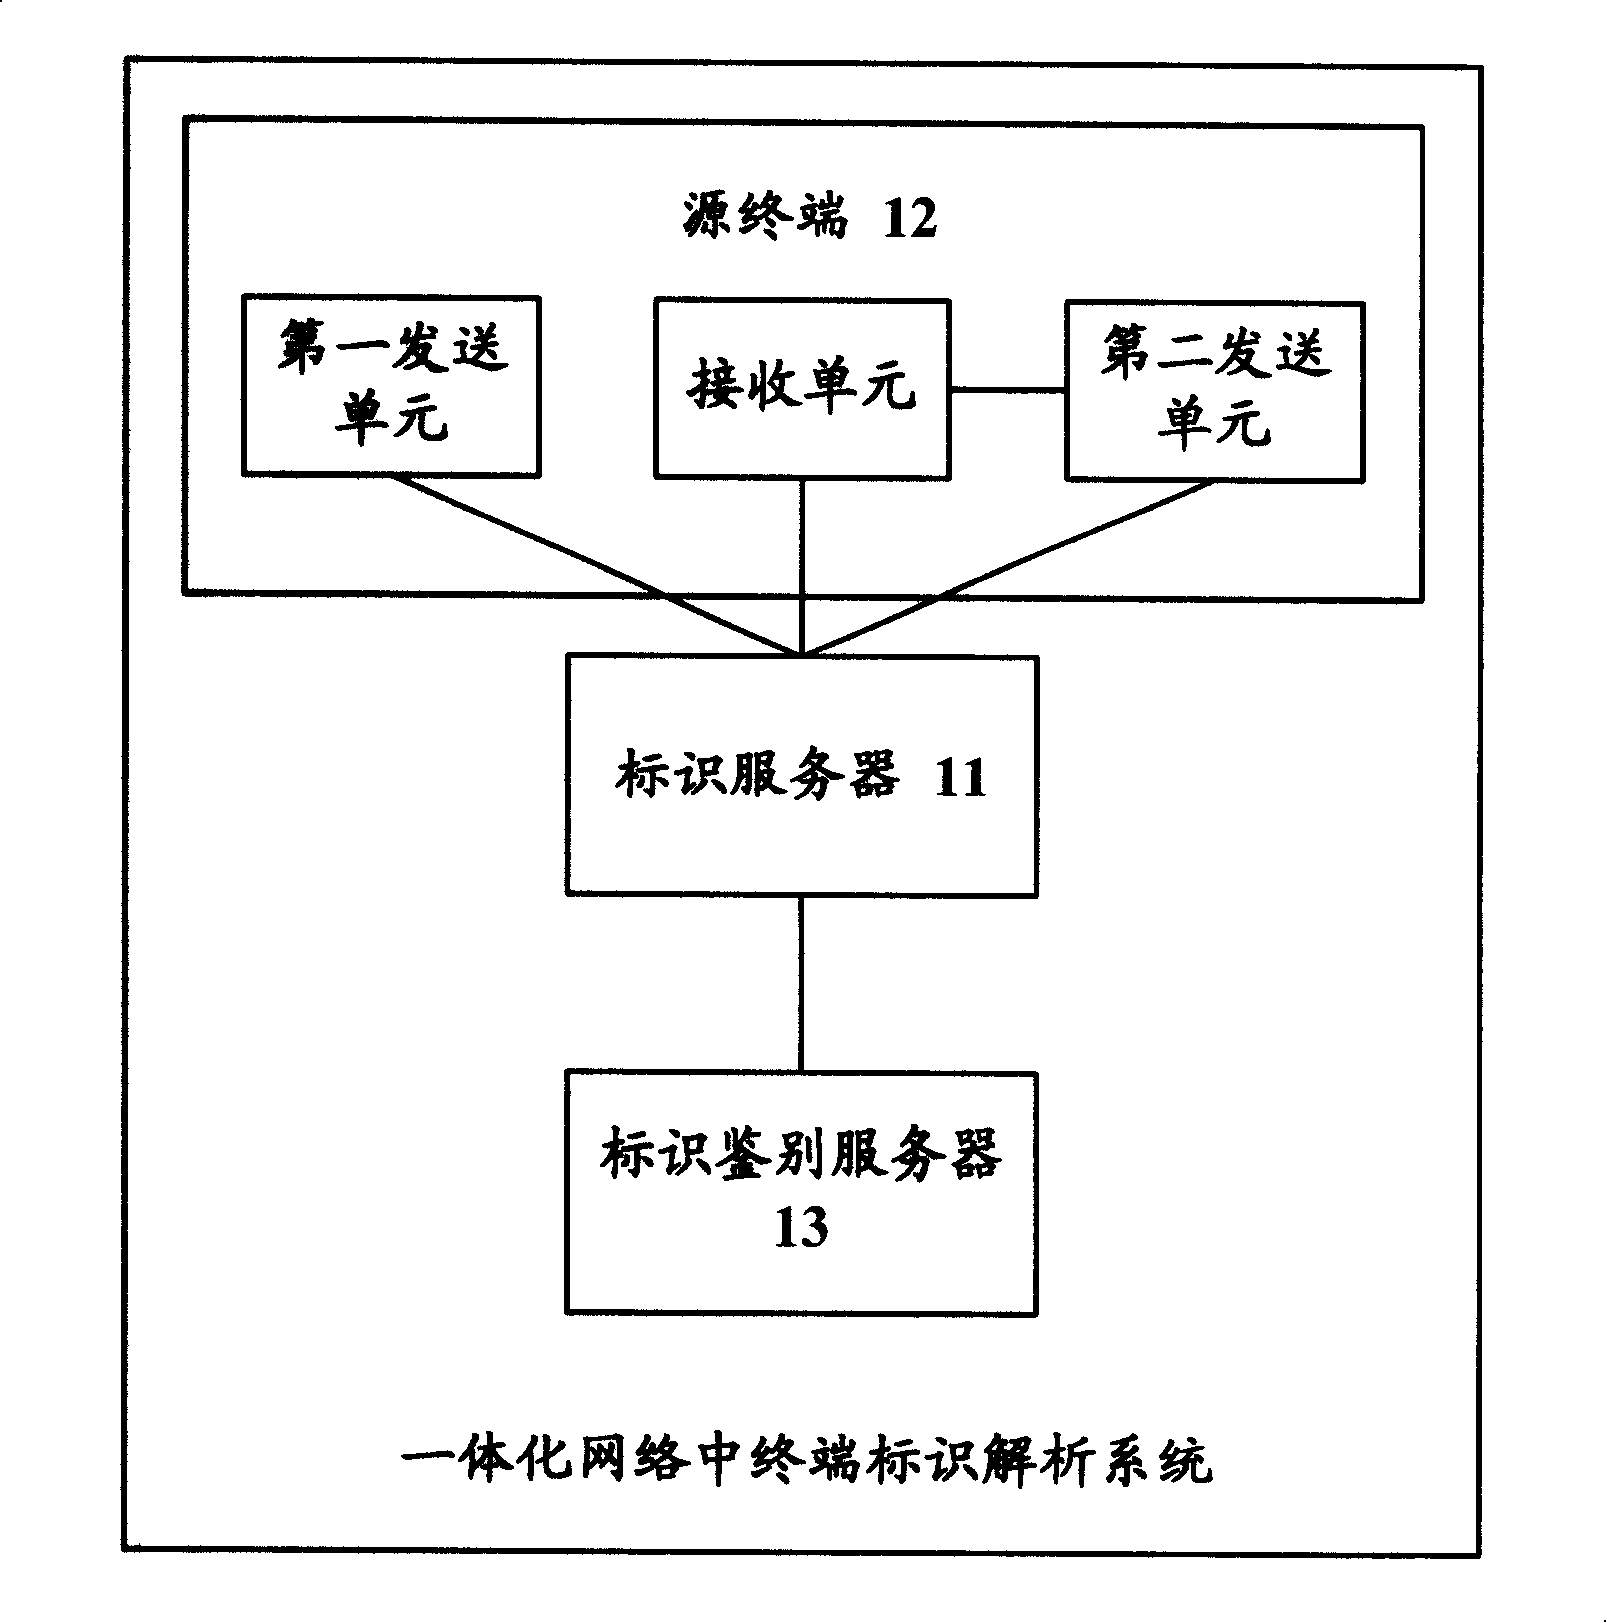 Terminal identifier parsing and service transmission method, system and device in integrated network